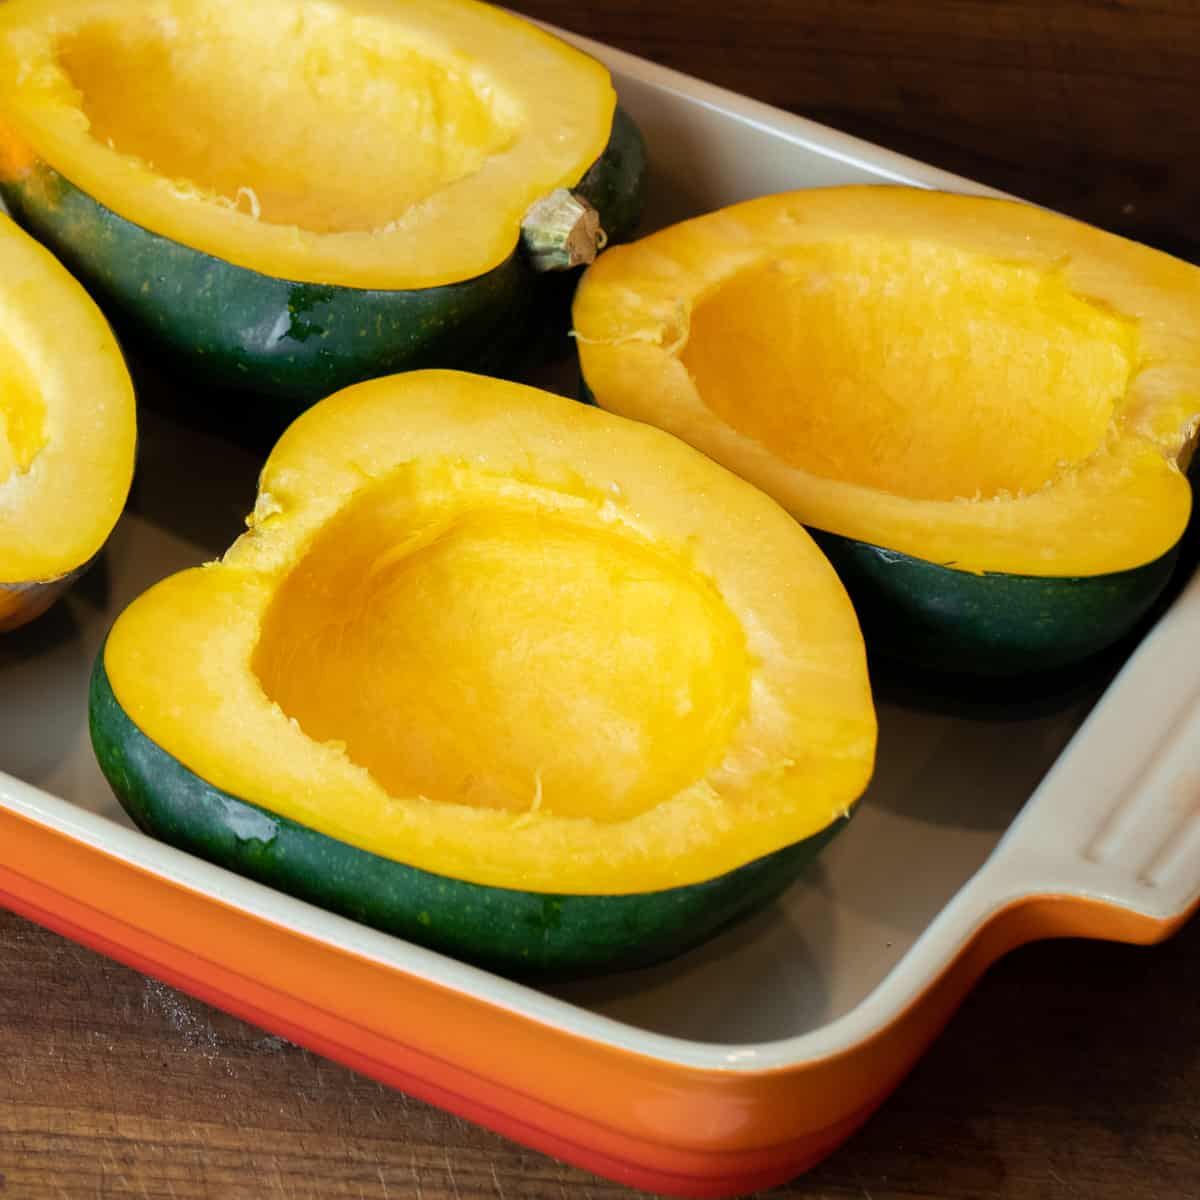 Halved and cleaned out acorn squash in a baking dish.